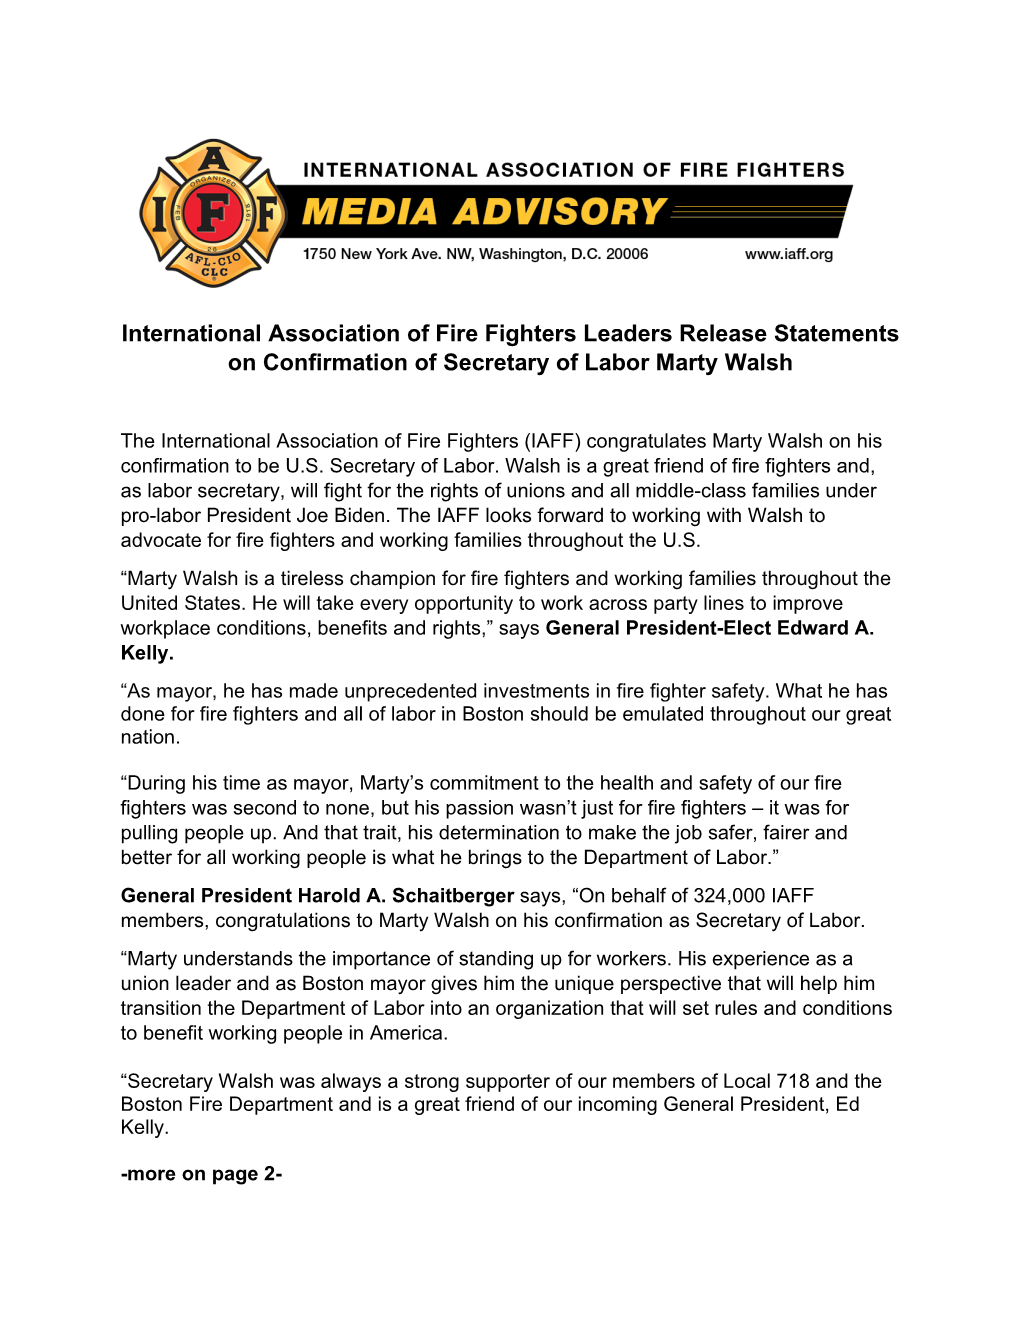 IAFF Leaders Release Statements on Confirmation of Secretary of Labor